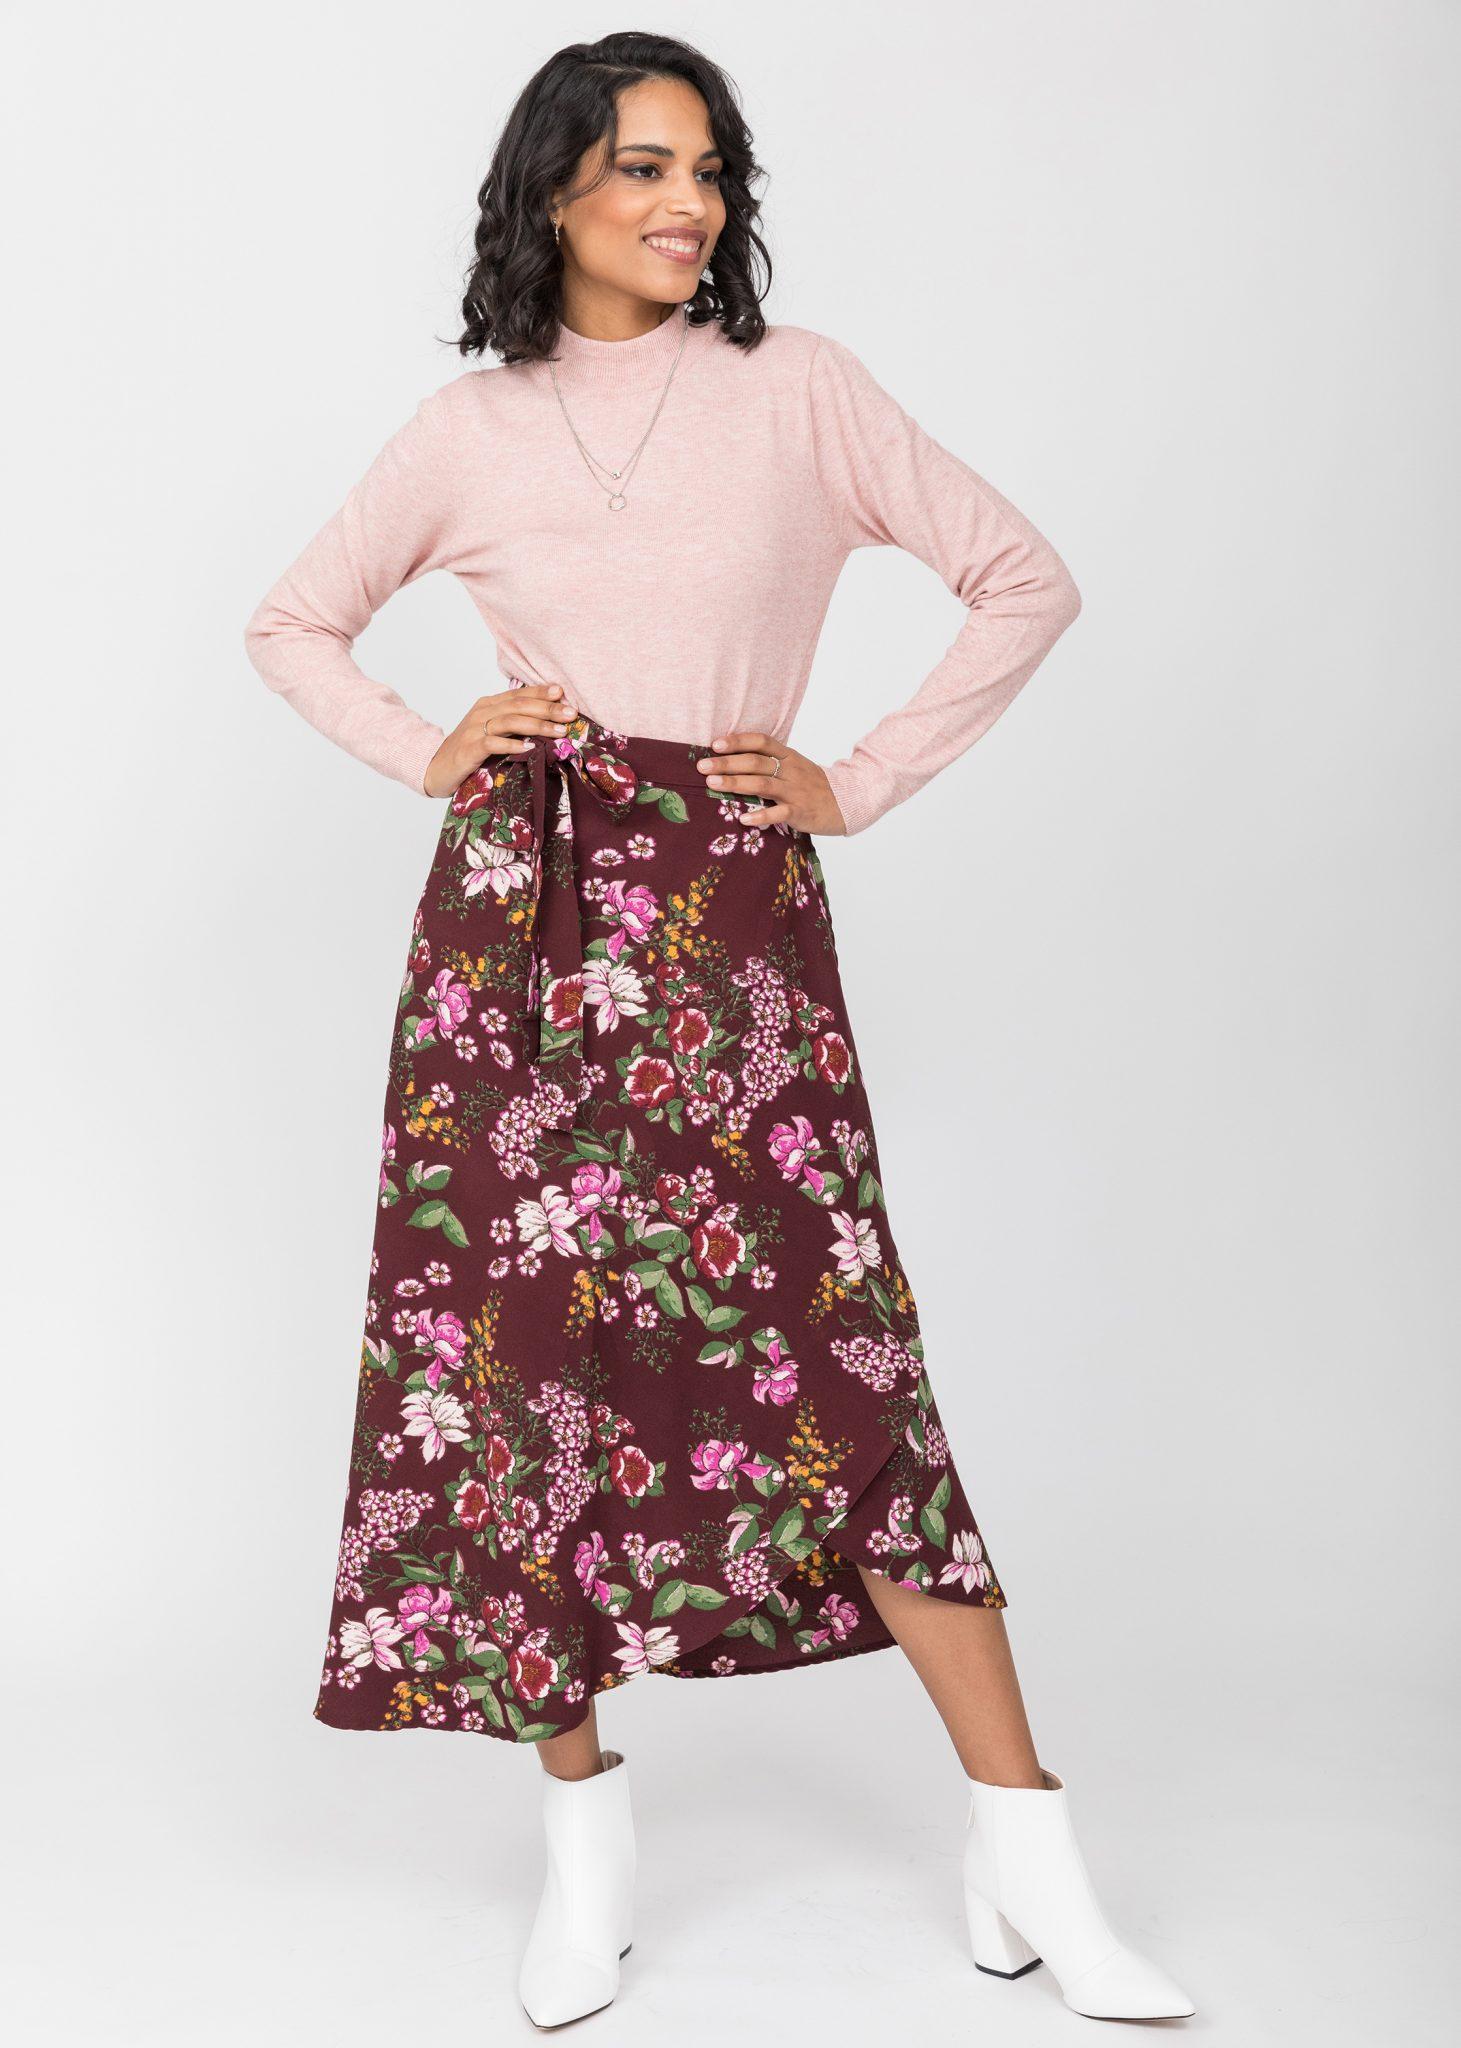 Maxi Wrap Skirt in Pink Floral Burgundy – likemary